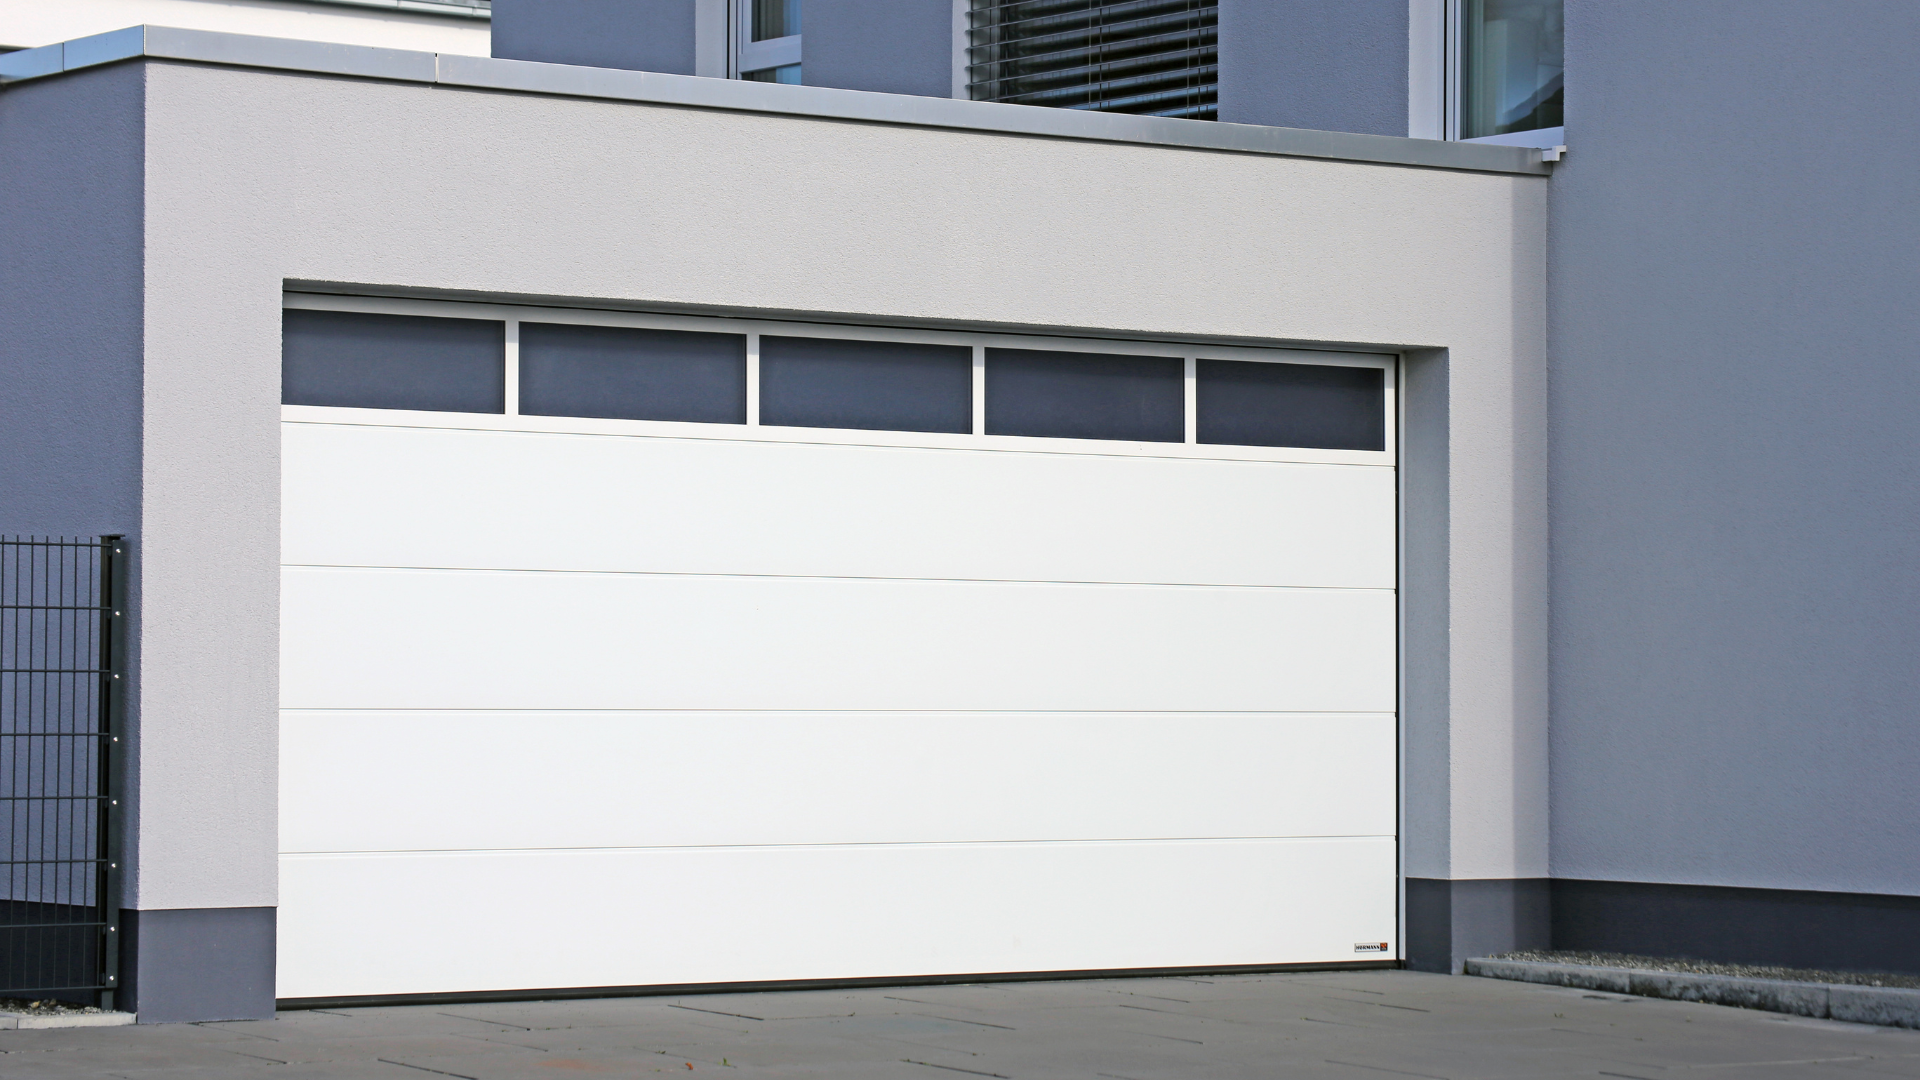 sectional garage door windows and vision panels